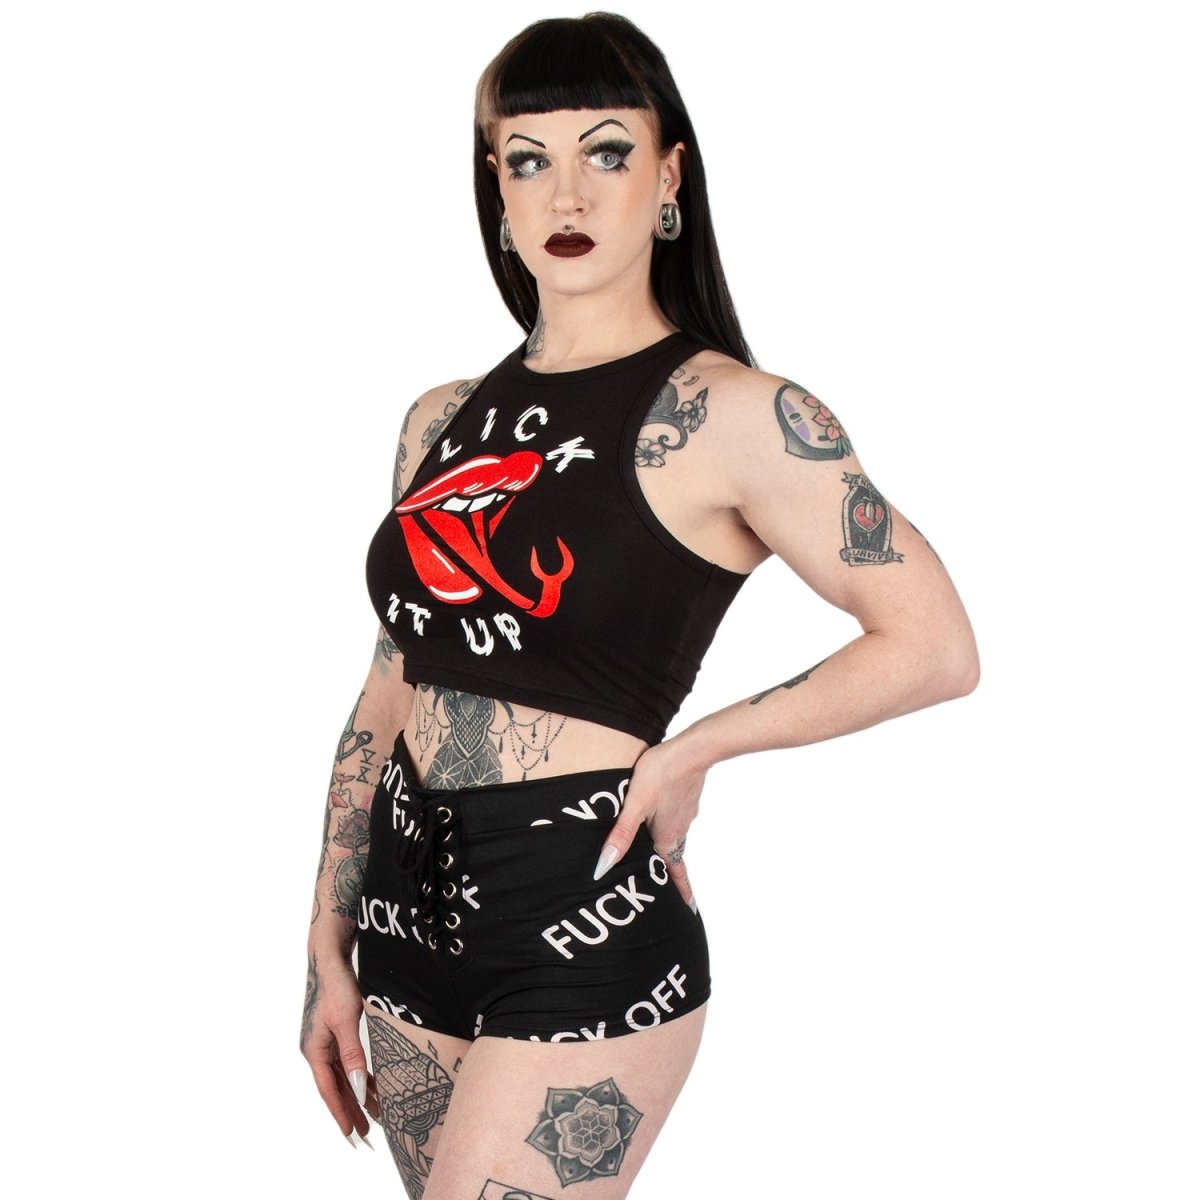 Too Fast | Switchblade Stiletto | Lick It Up Crop Tank